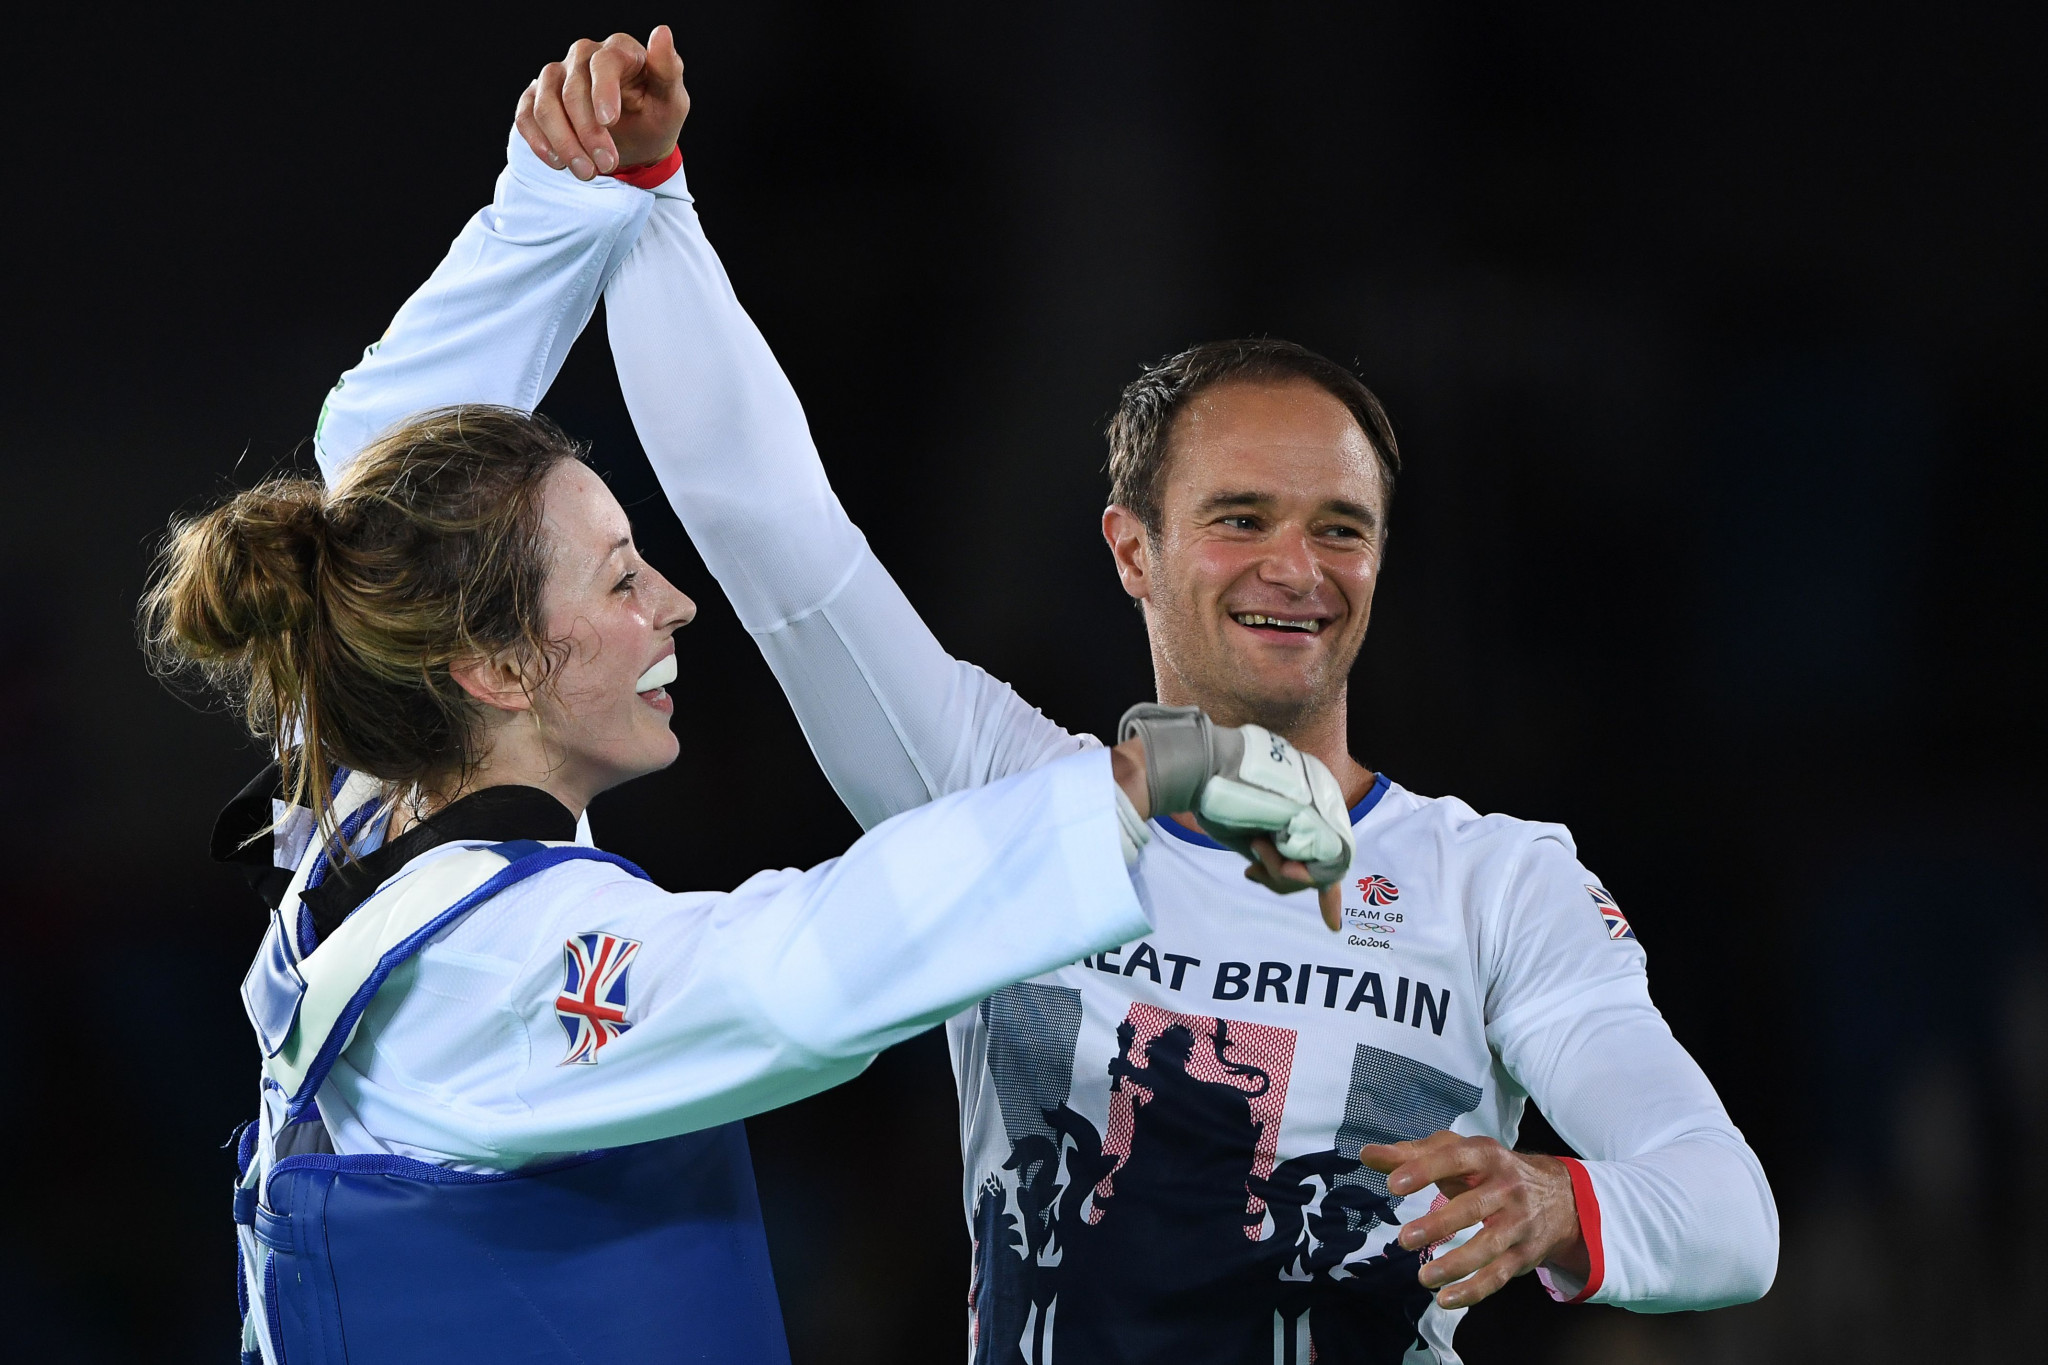 Paul Green coached Britain's Jade Jones to Olympic gold medals at London 2012 and Rio 2016 ©Getty Images